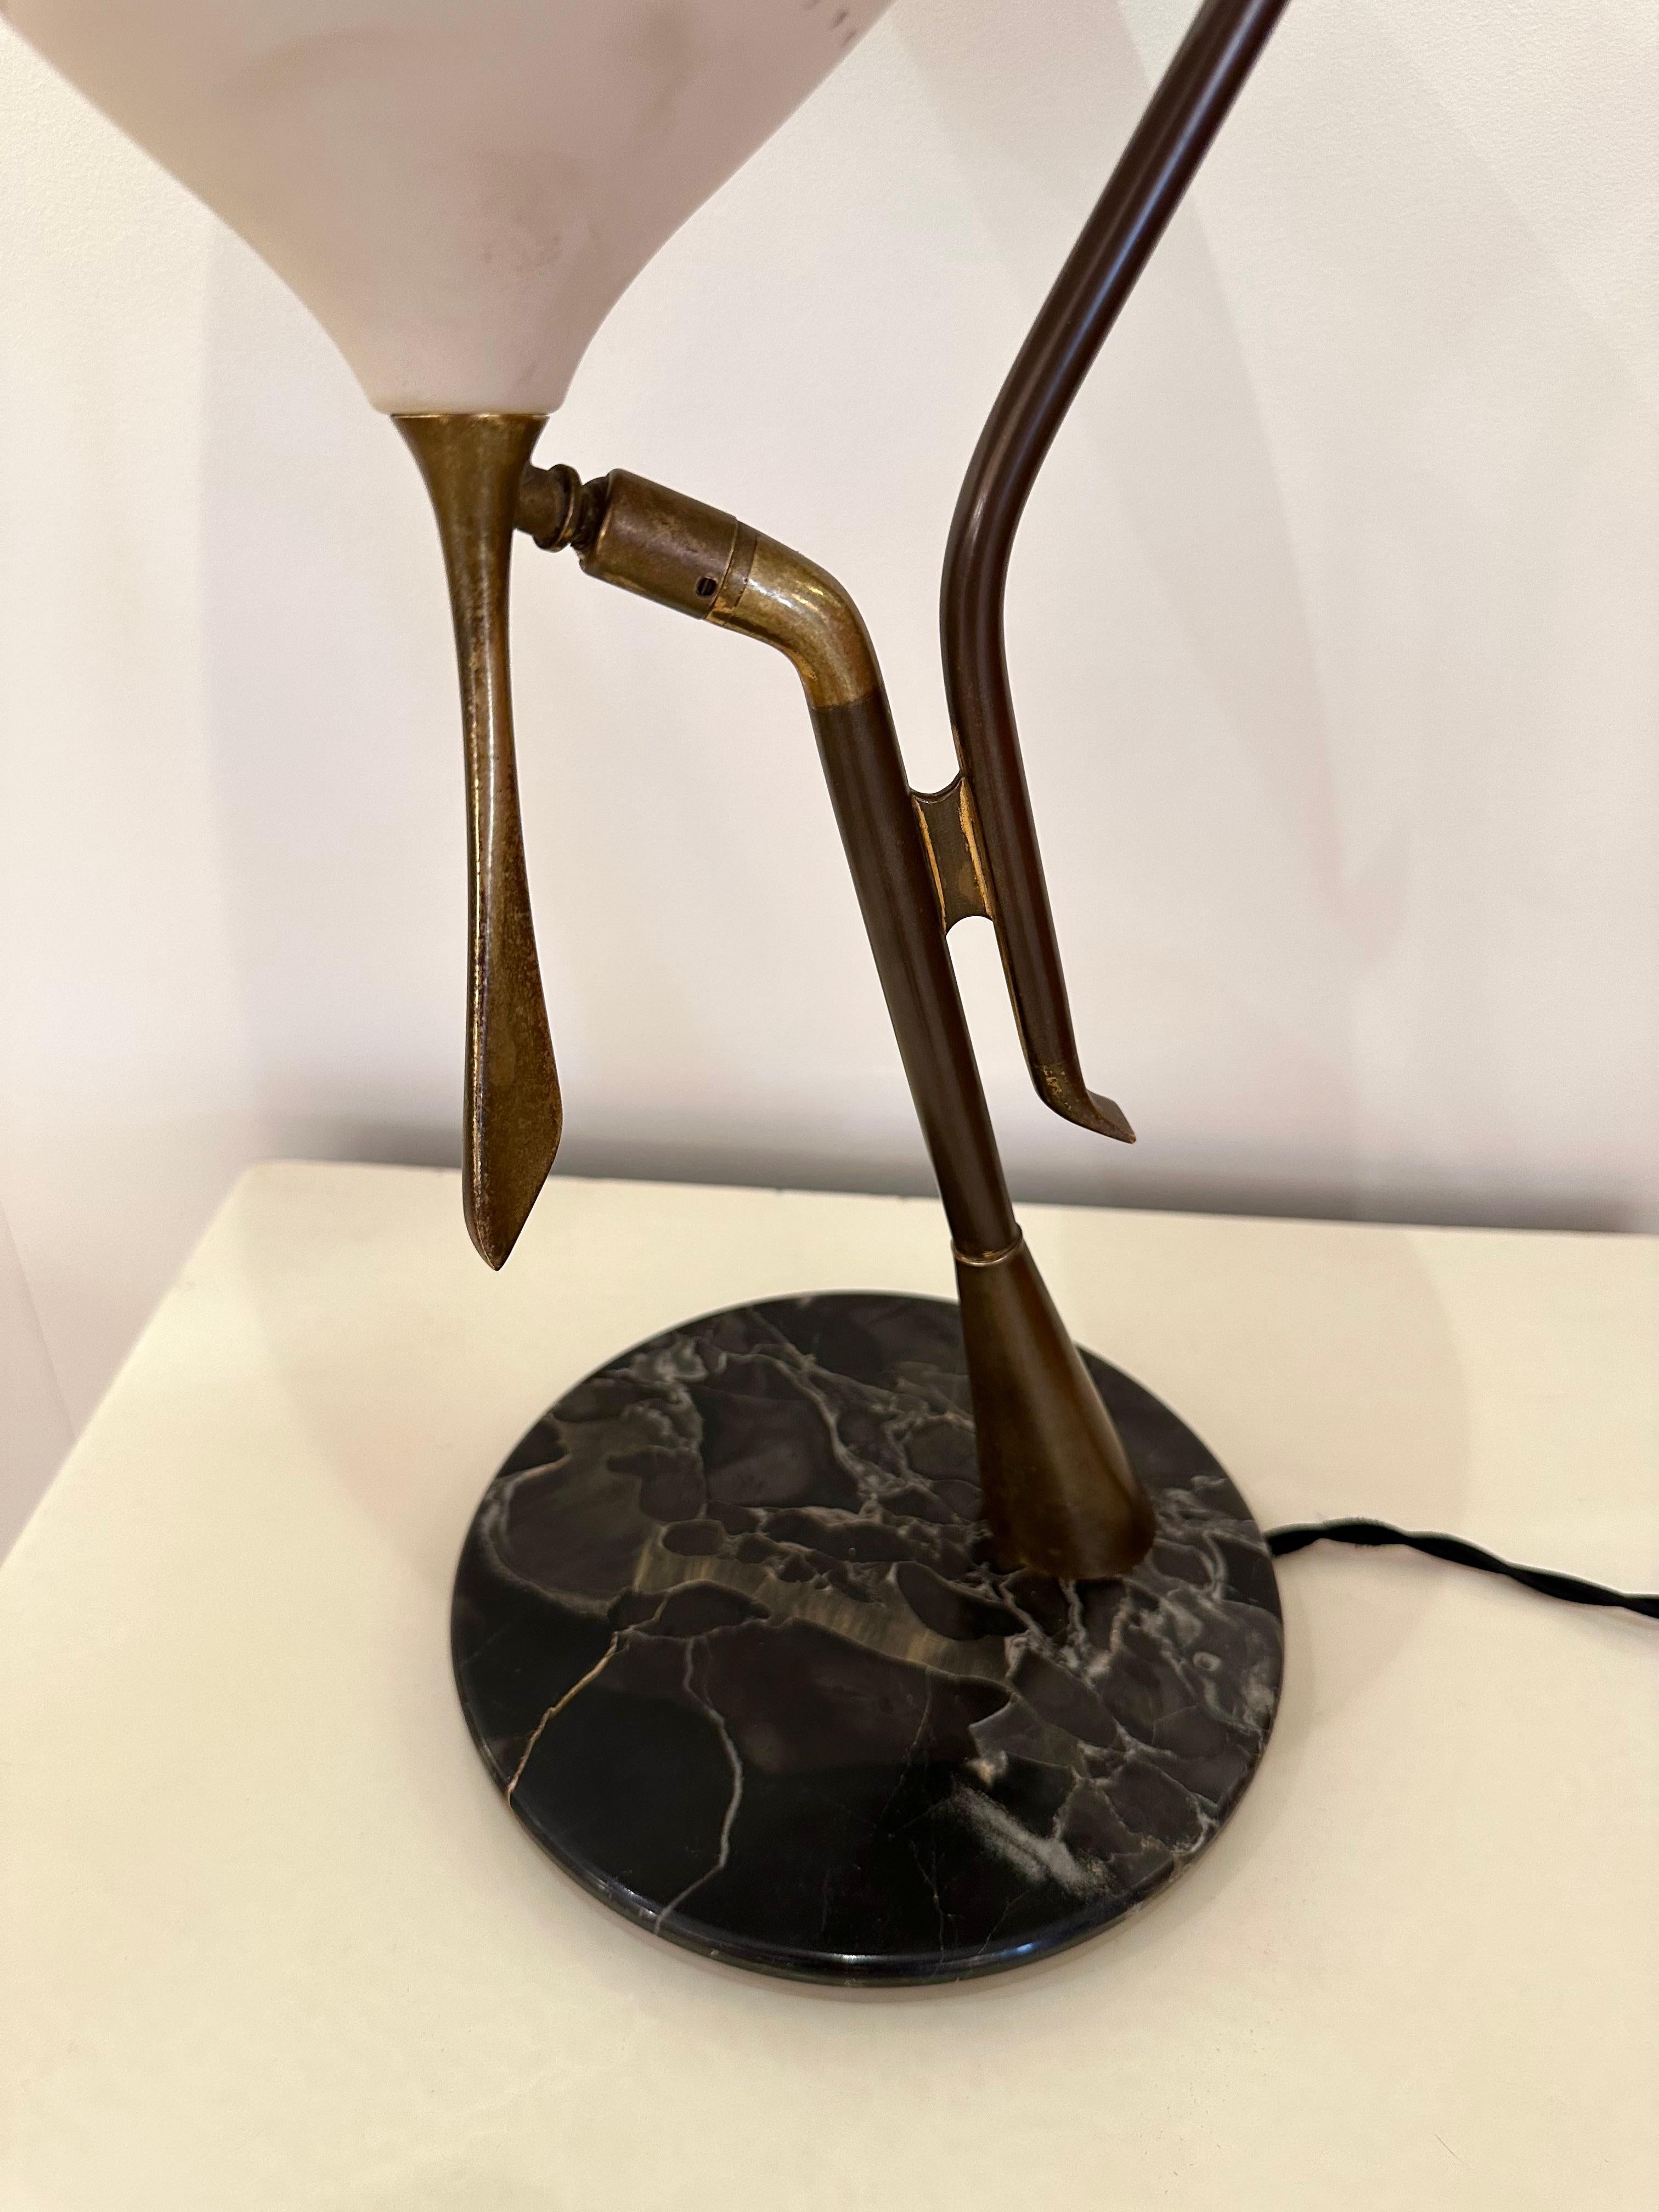 Mid-20th Century Midcentury Desk Lamp Painted Metal, Brass, Marble by Lumen, Italy, 1950s For Sale